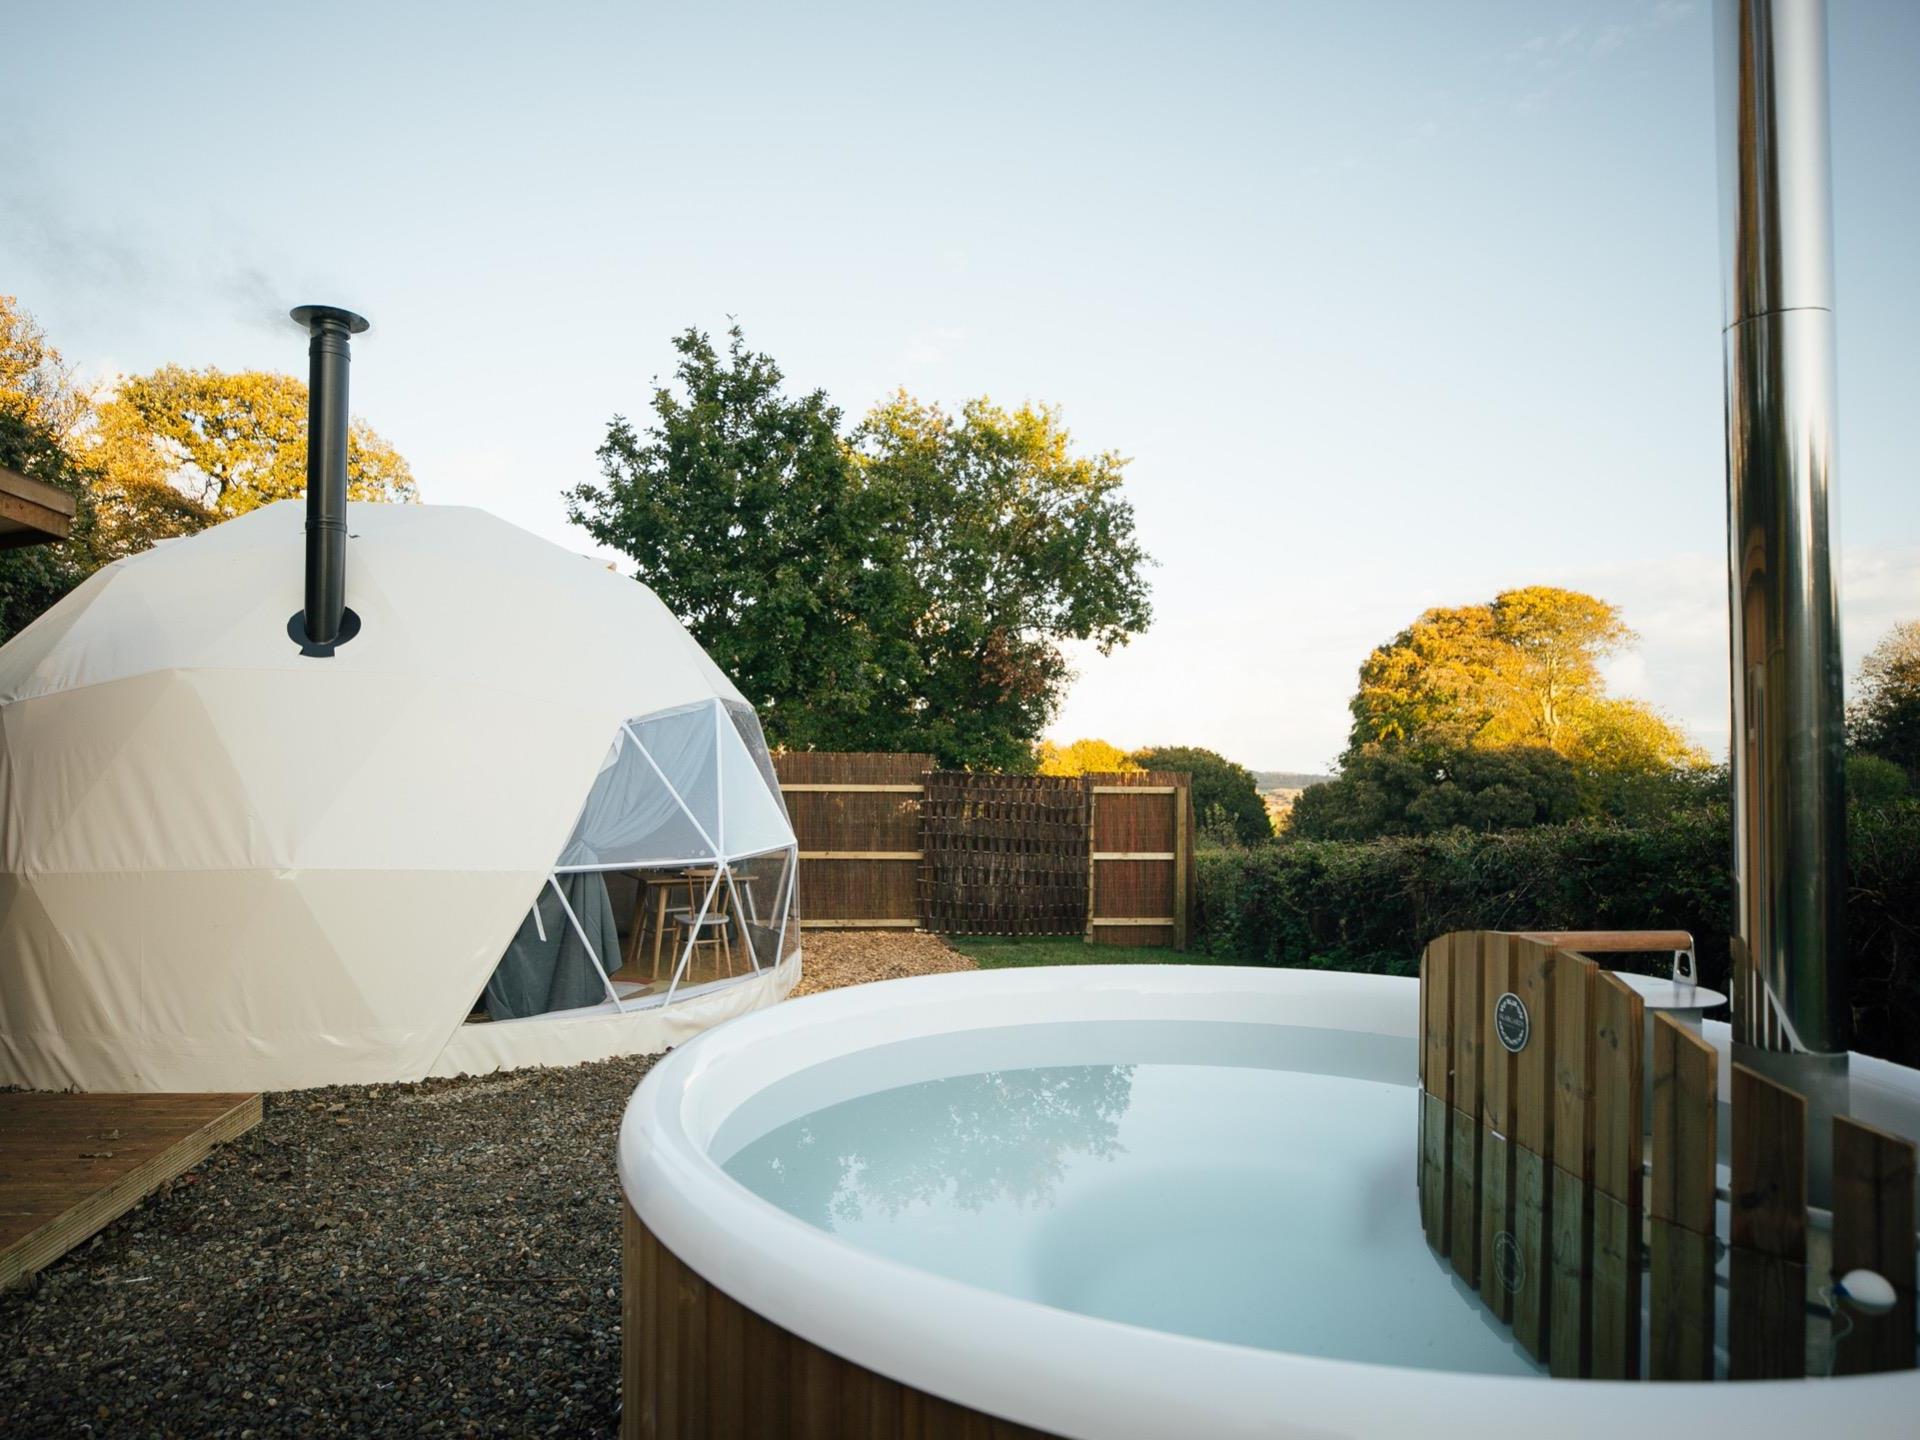 The domes garden and hot tub 